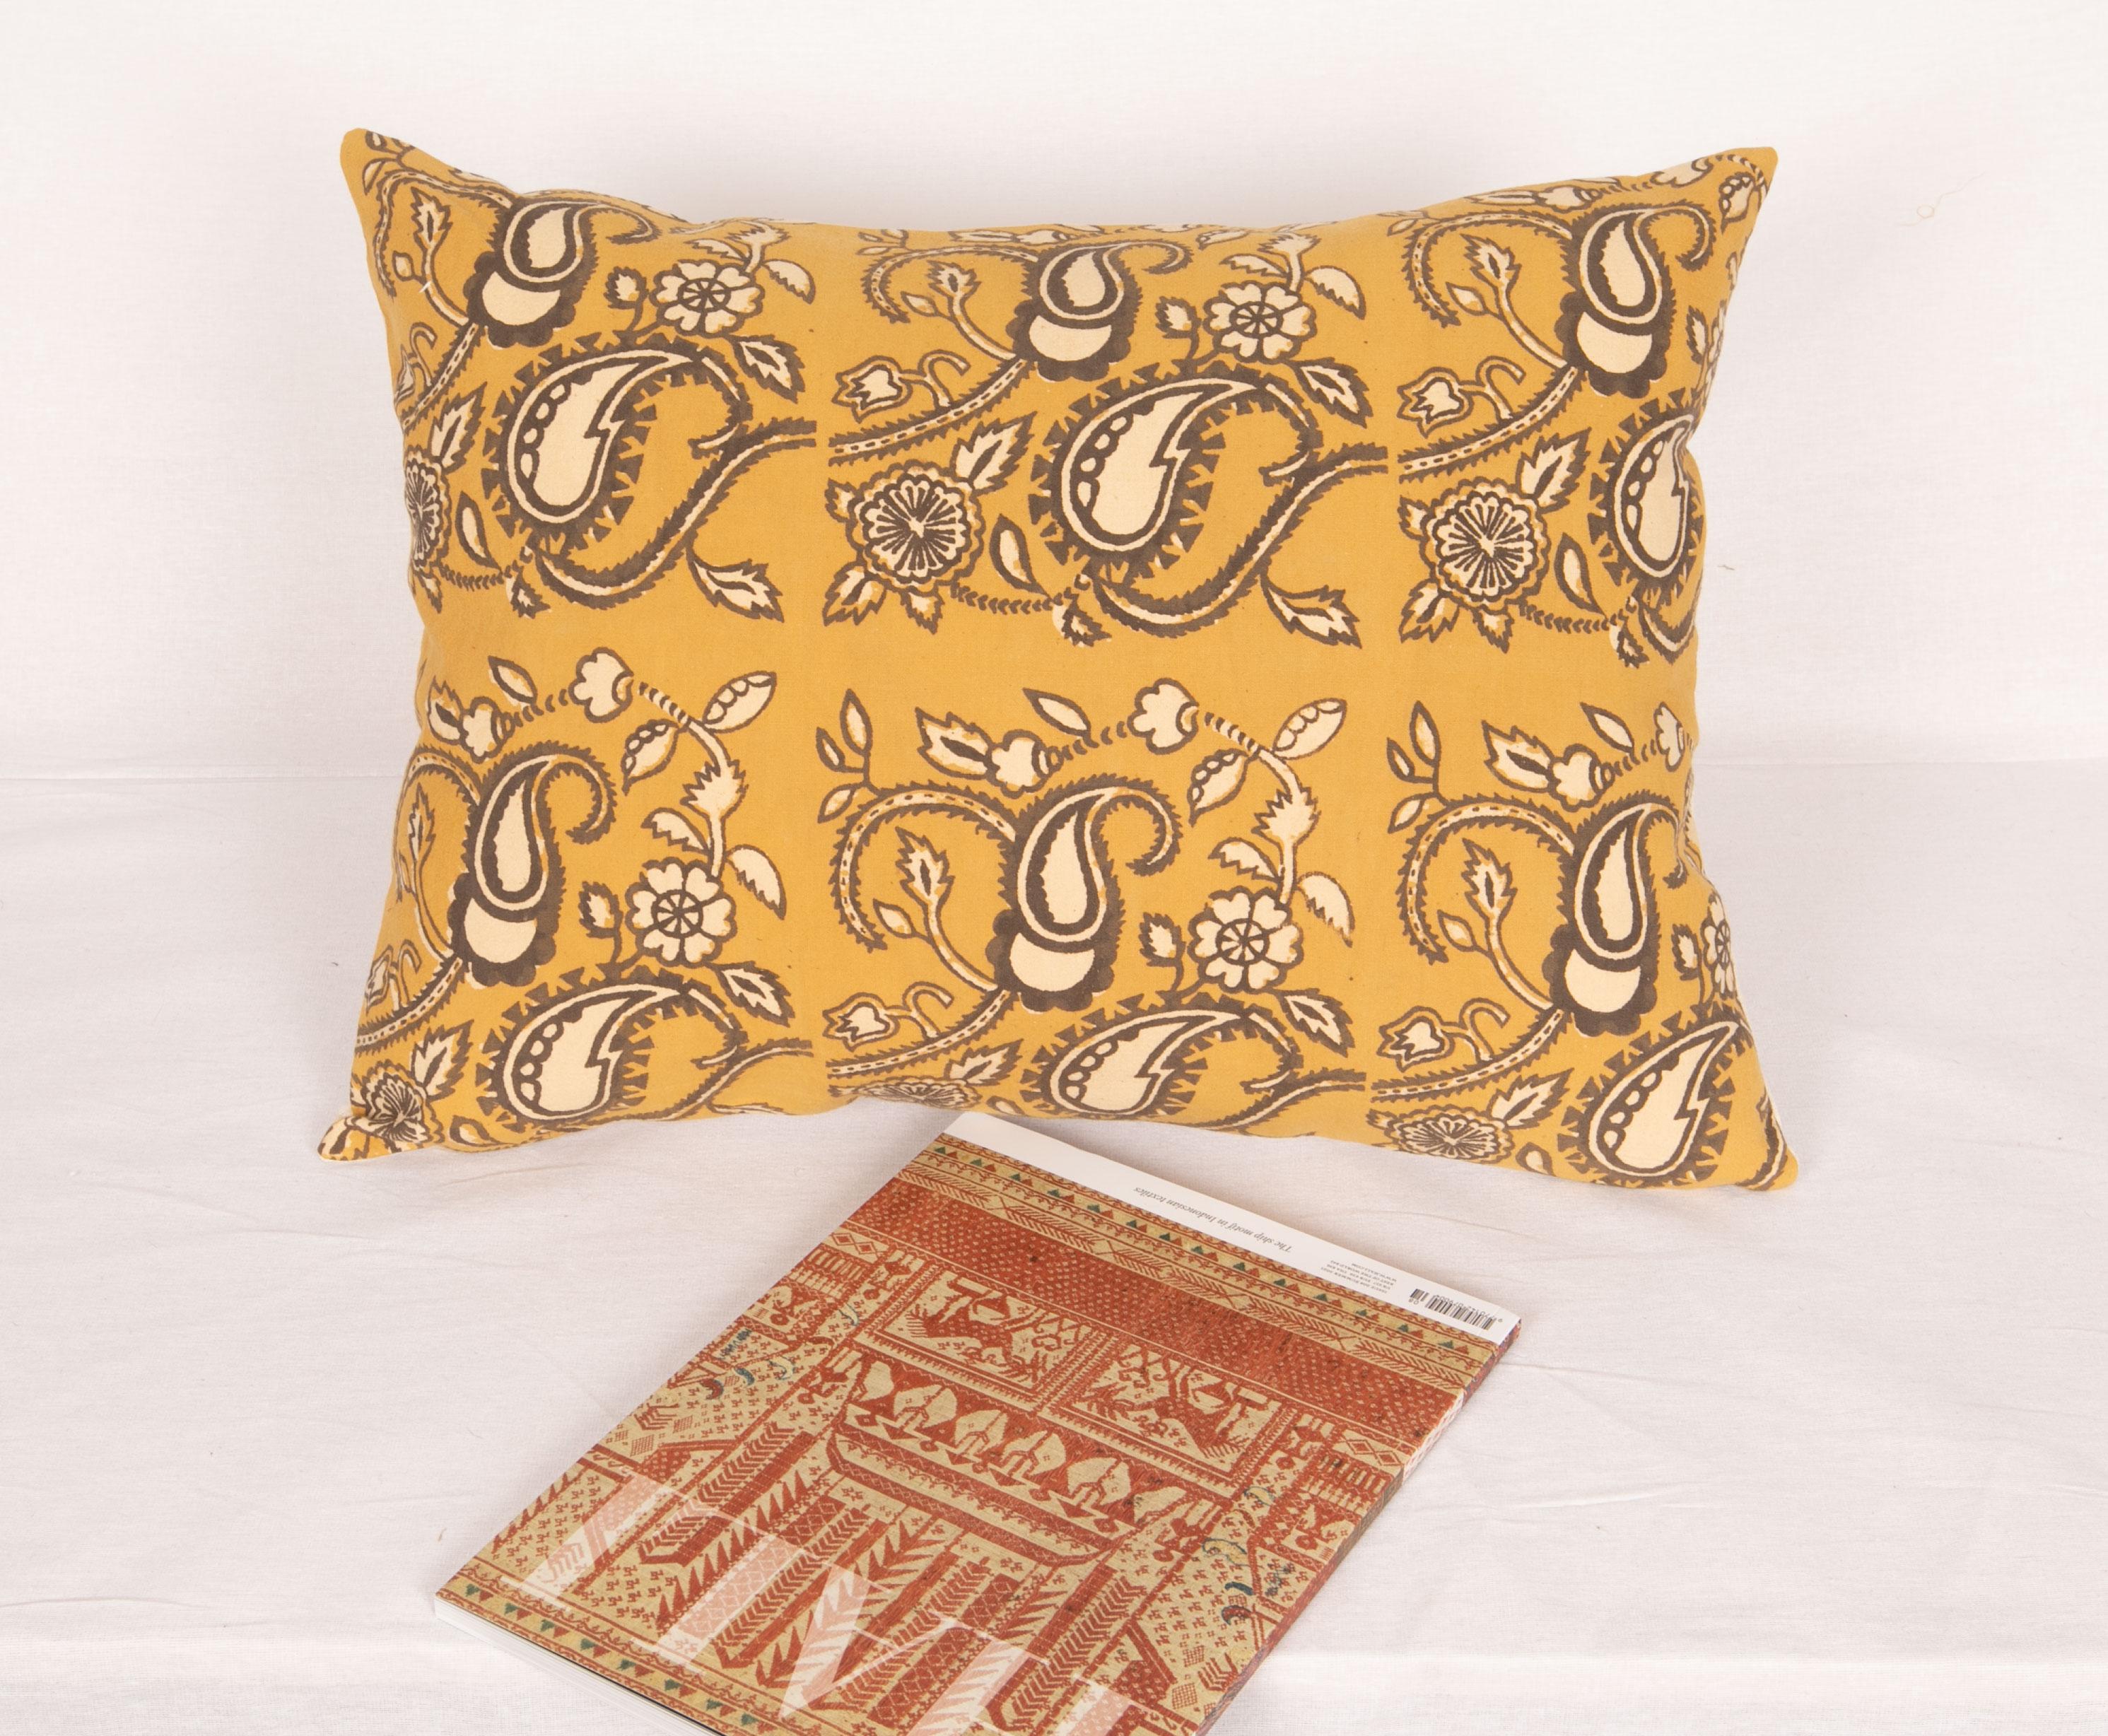 Indian Pillow Case Made from an Uzbek Block Print, Early 20th Century For Sale